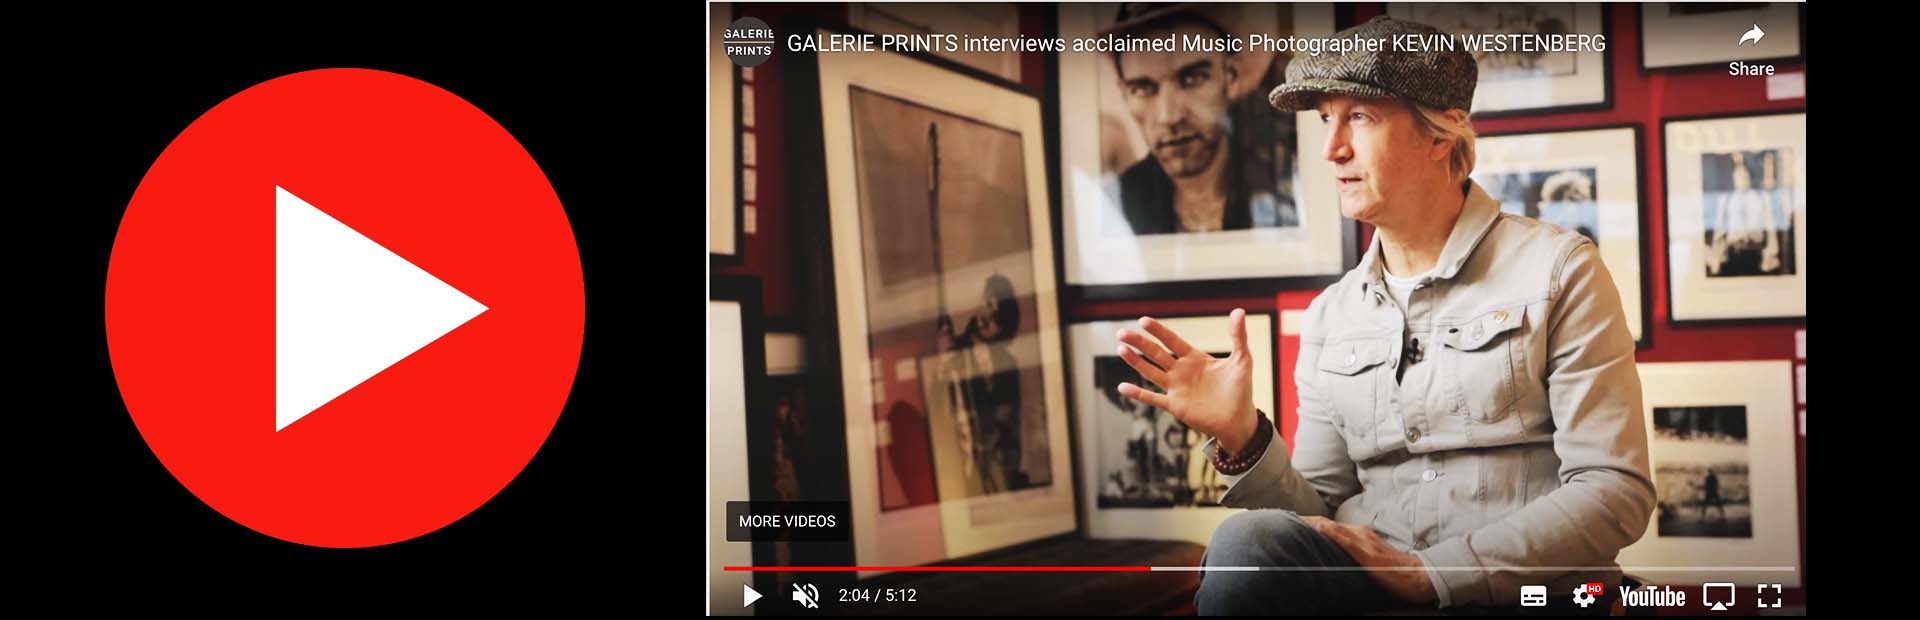 Kevin Westenberg interview with Galerie Prints talks about his music photography career.